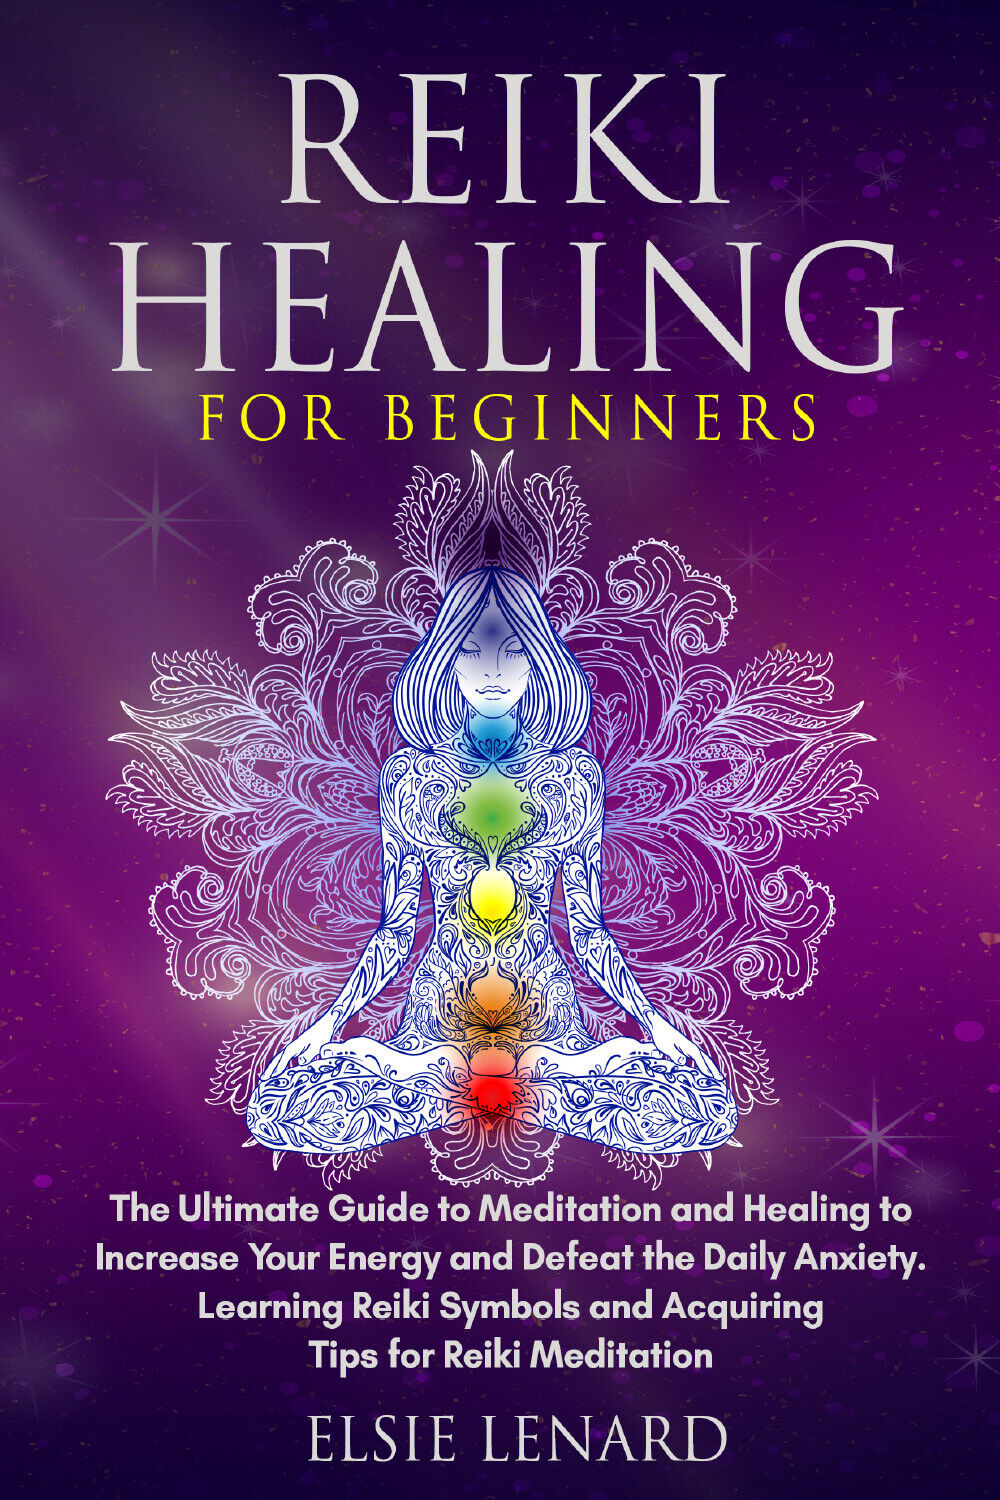 Reiki healing for beginners. The ultimate guide to meditation and healing to inc libro usato